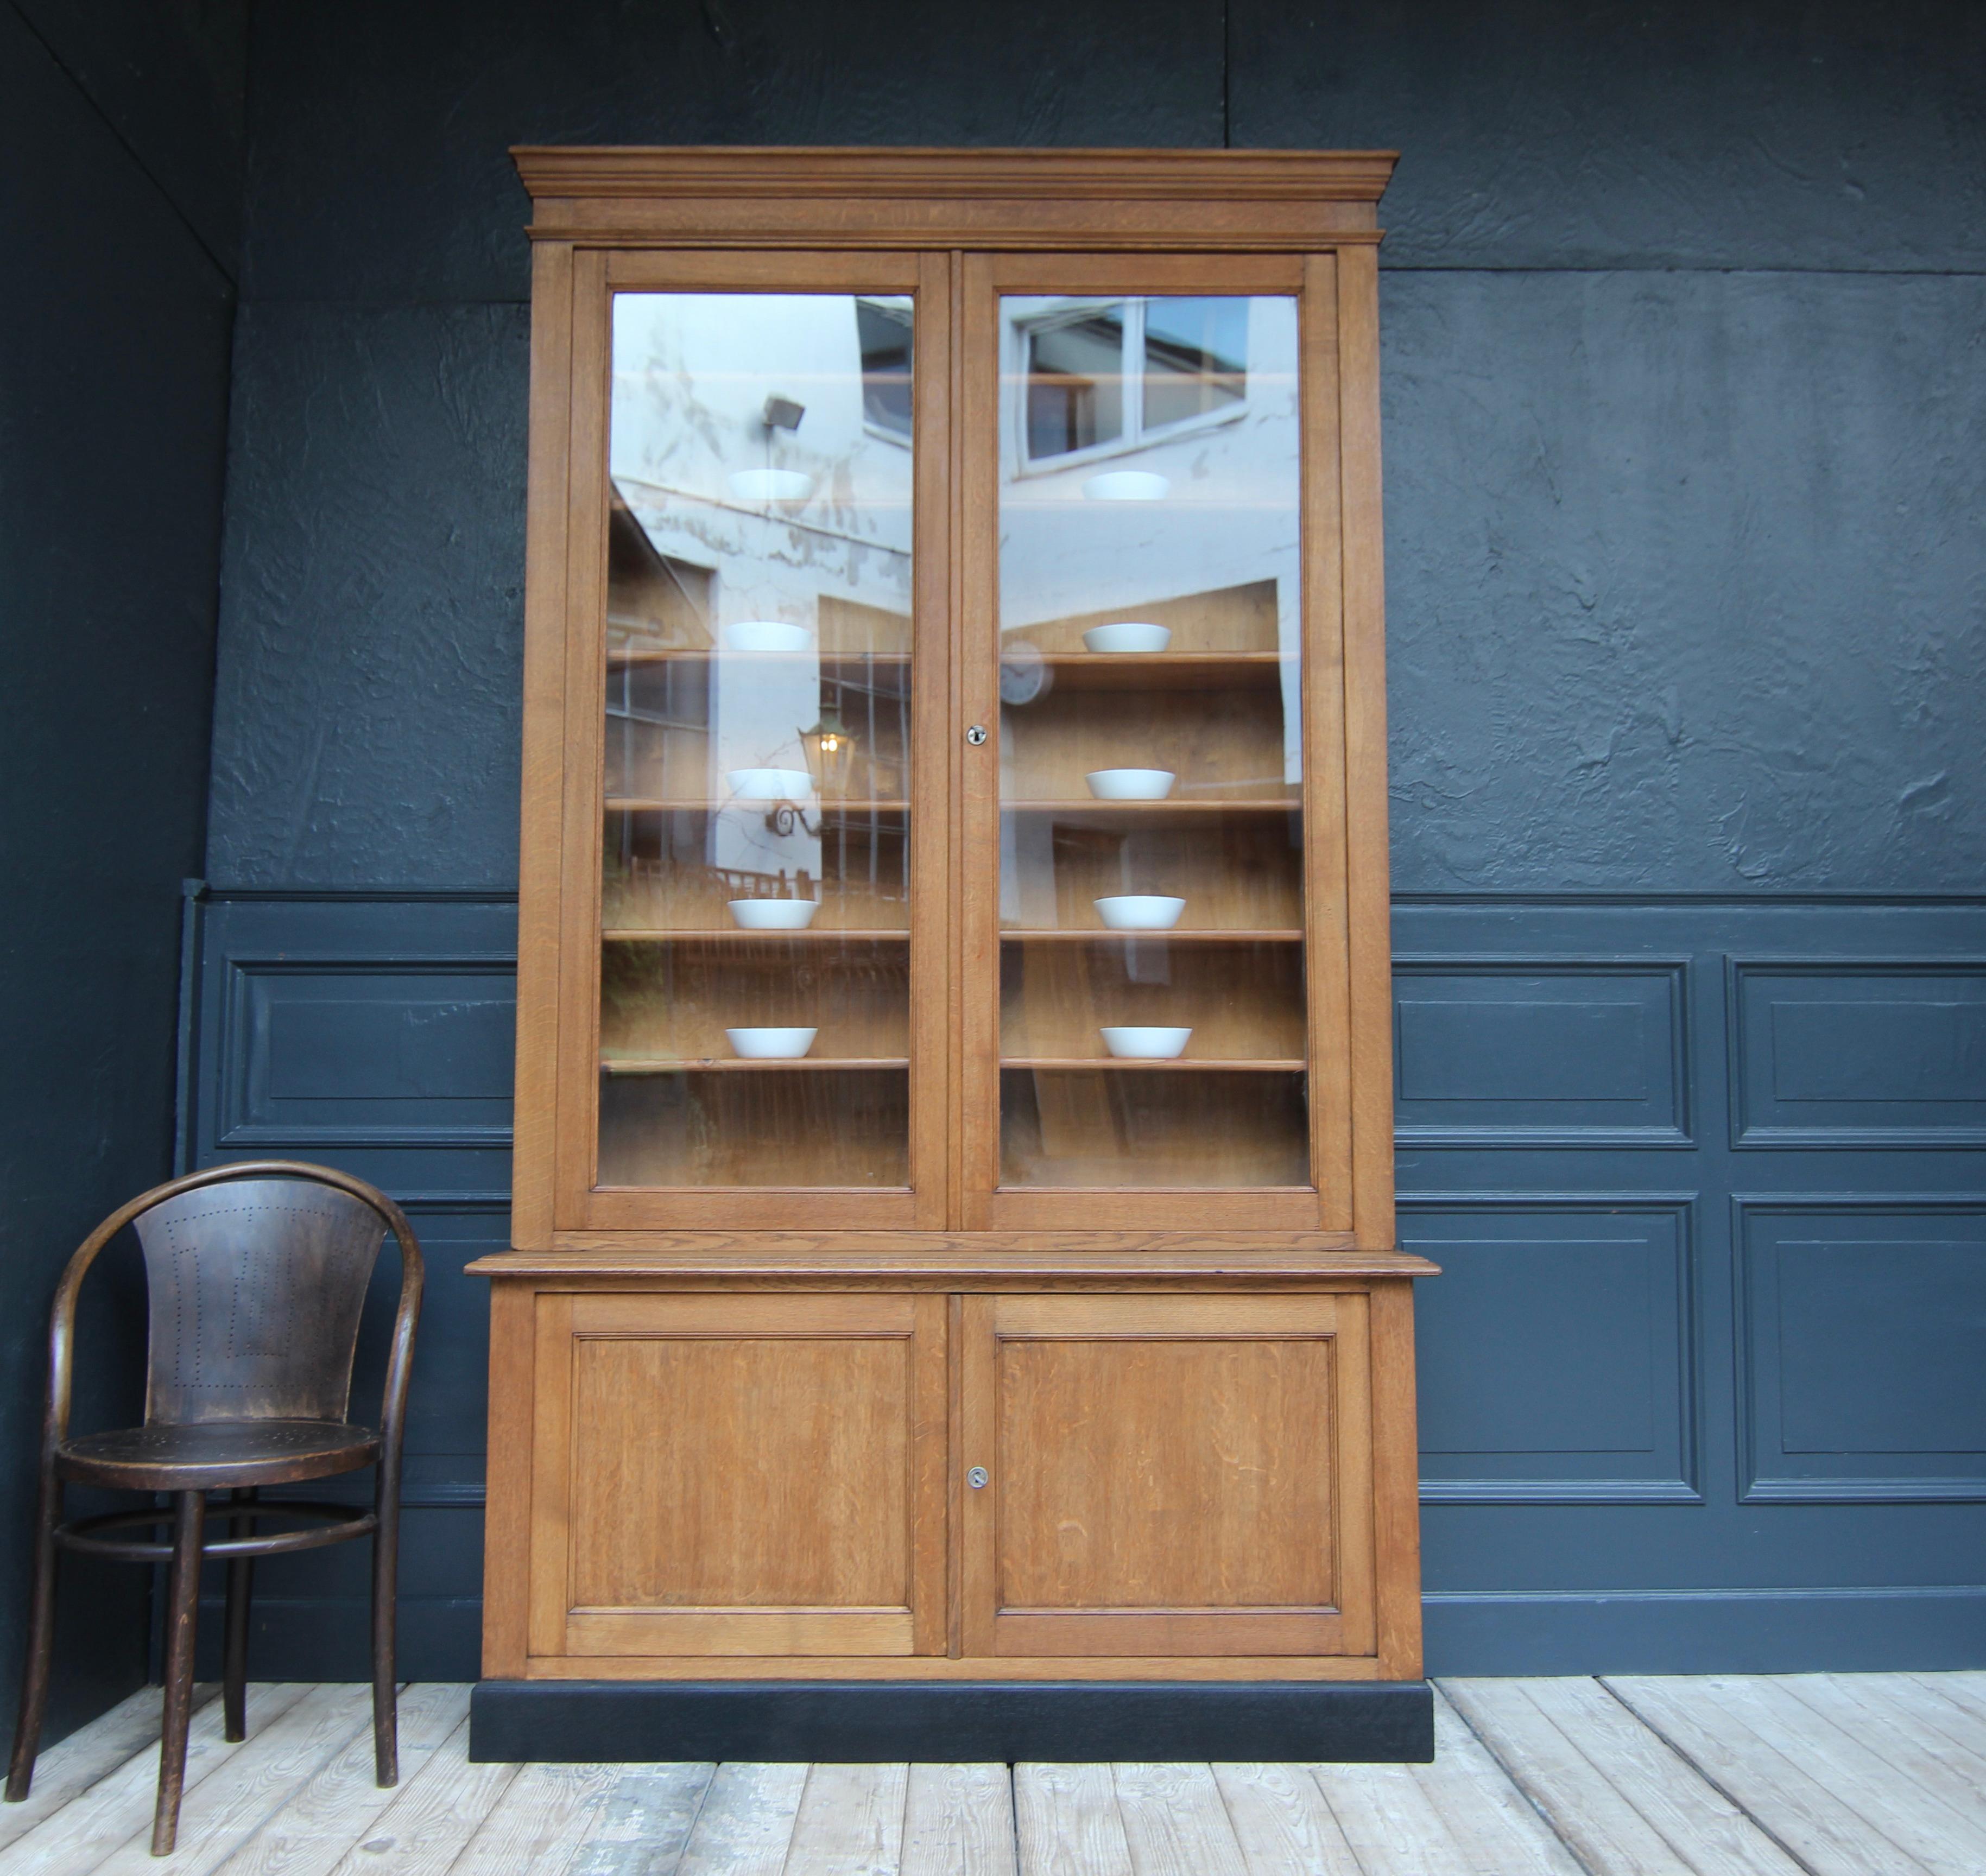 French bookcase or display cabinet from the shop fittings of a pharmacy. Around 1910.

A rare original in a classic timeless design with great proportions.

 
Straight-lined four-door body in oak, consisting of a base cabinet standing on an ebonised